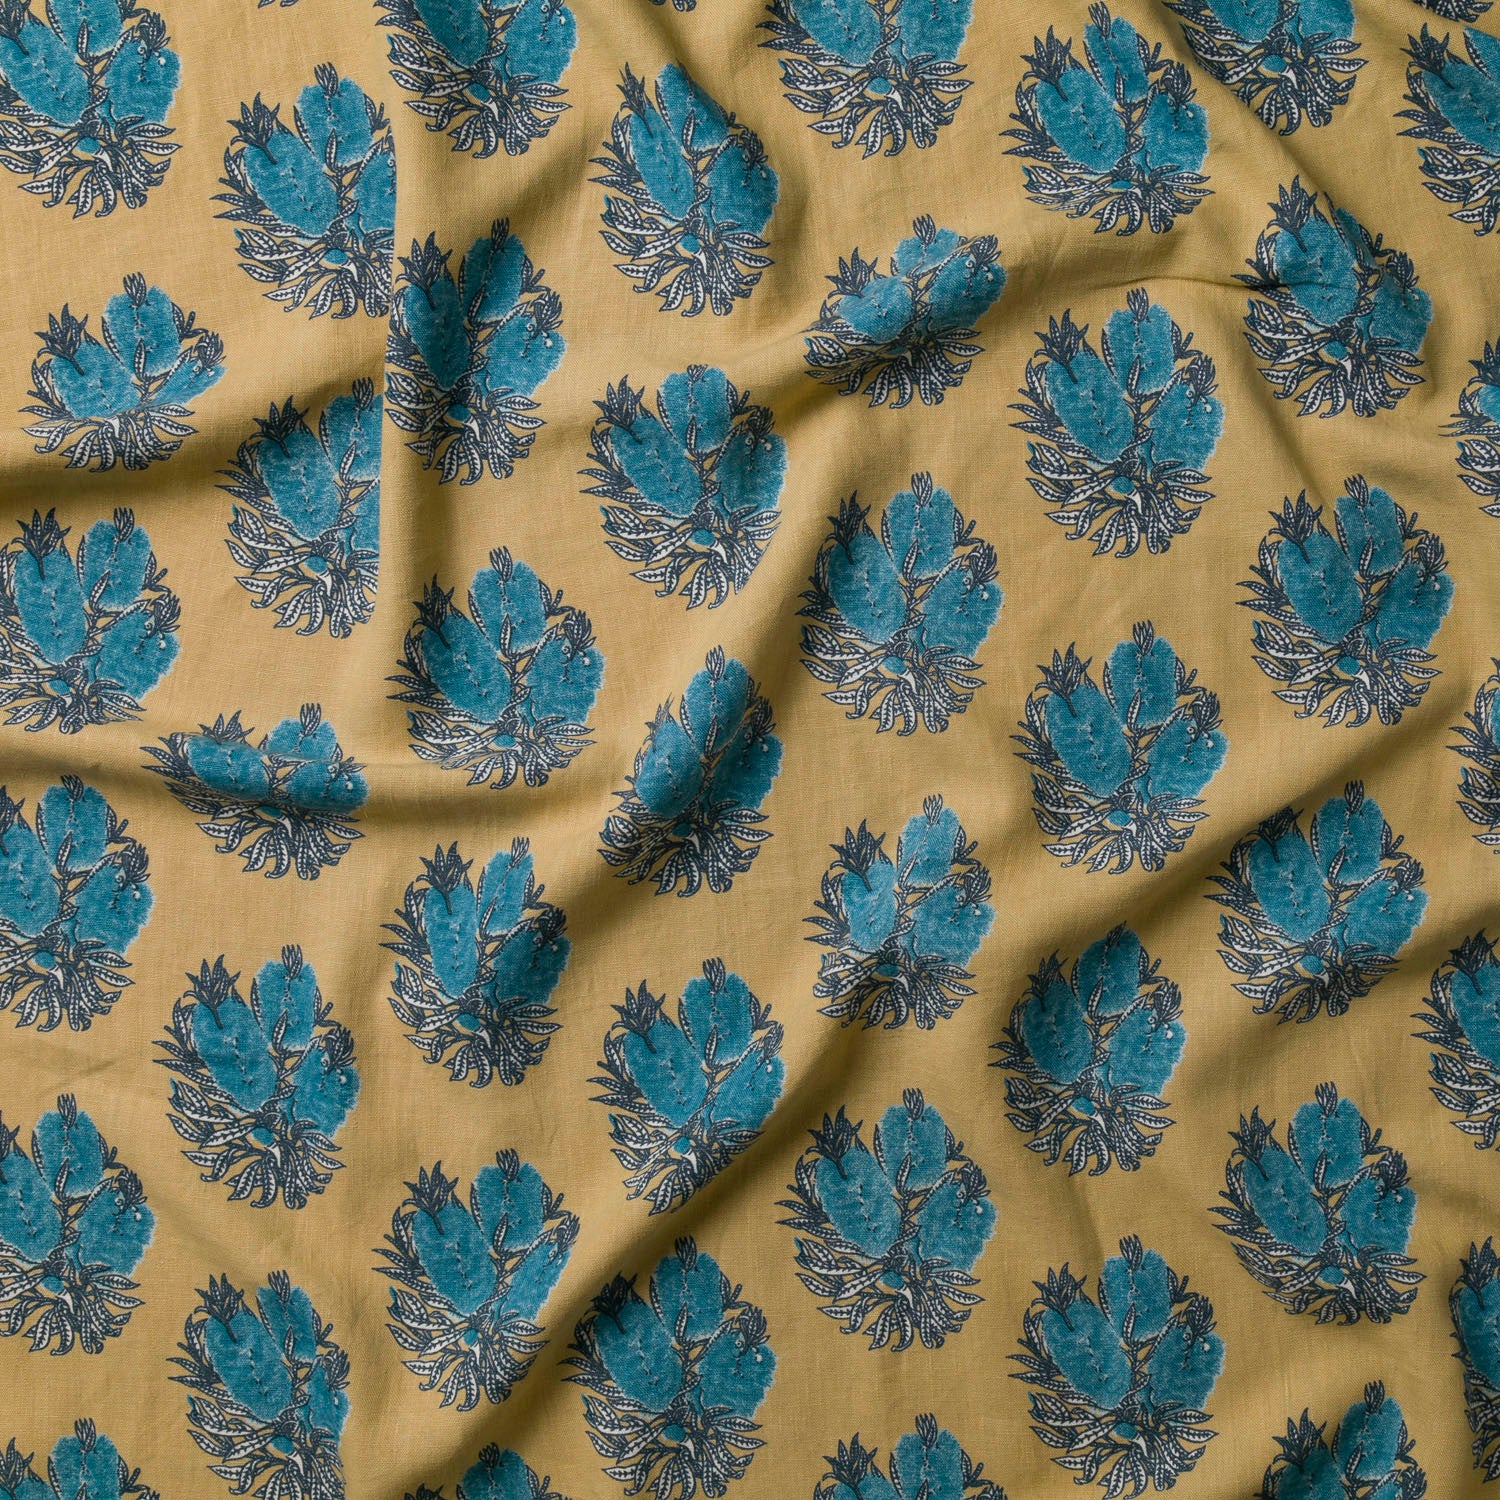 Draped fabric in a floral cameo print in blue and gray on a mustard field.